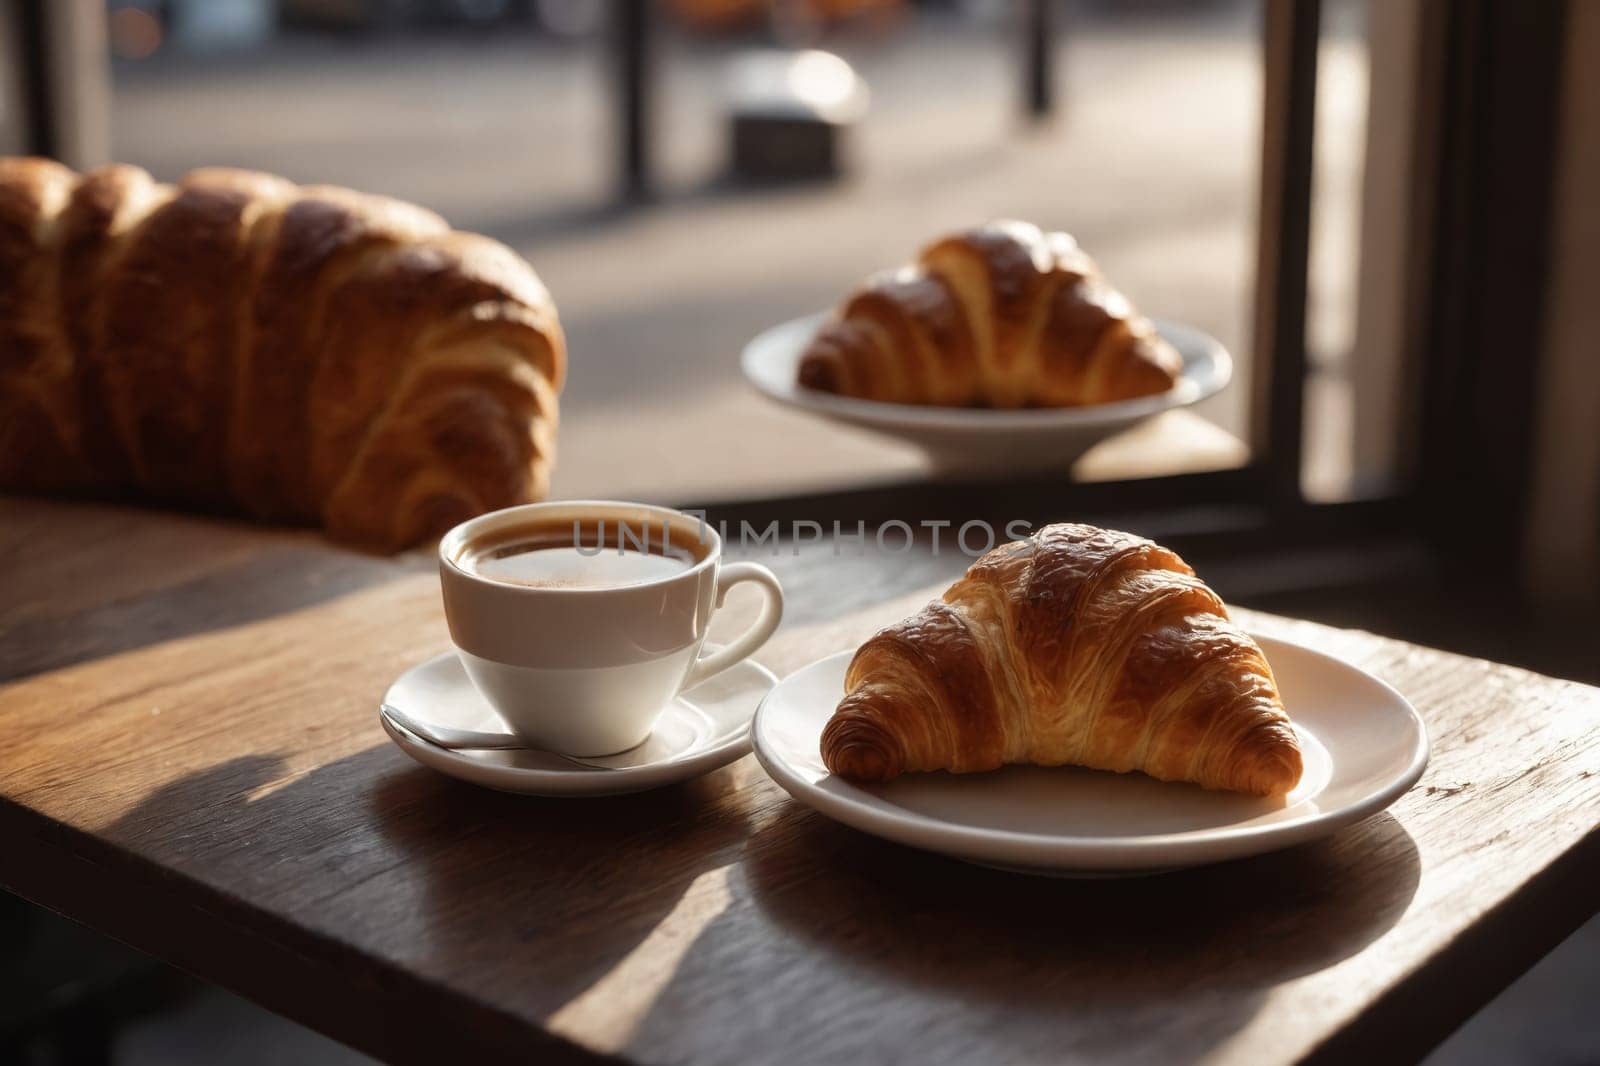 Gourmet croissants and rich coffee, the ideal companions for a satisfying breakfast.